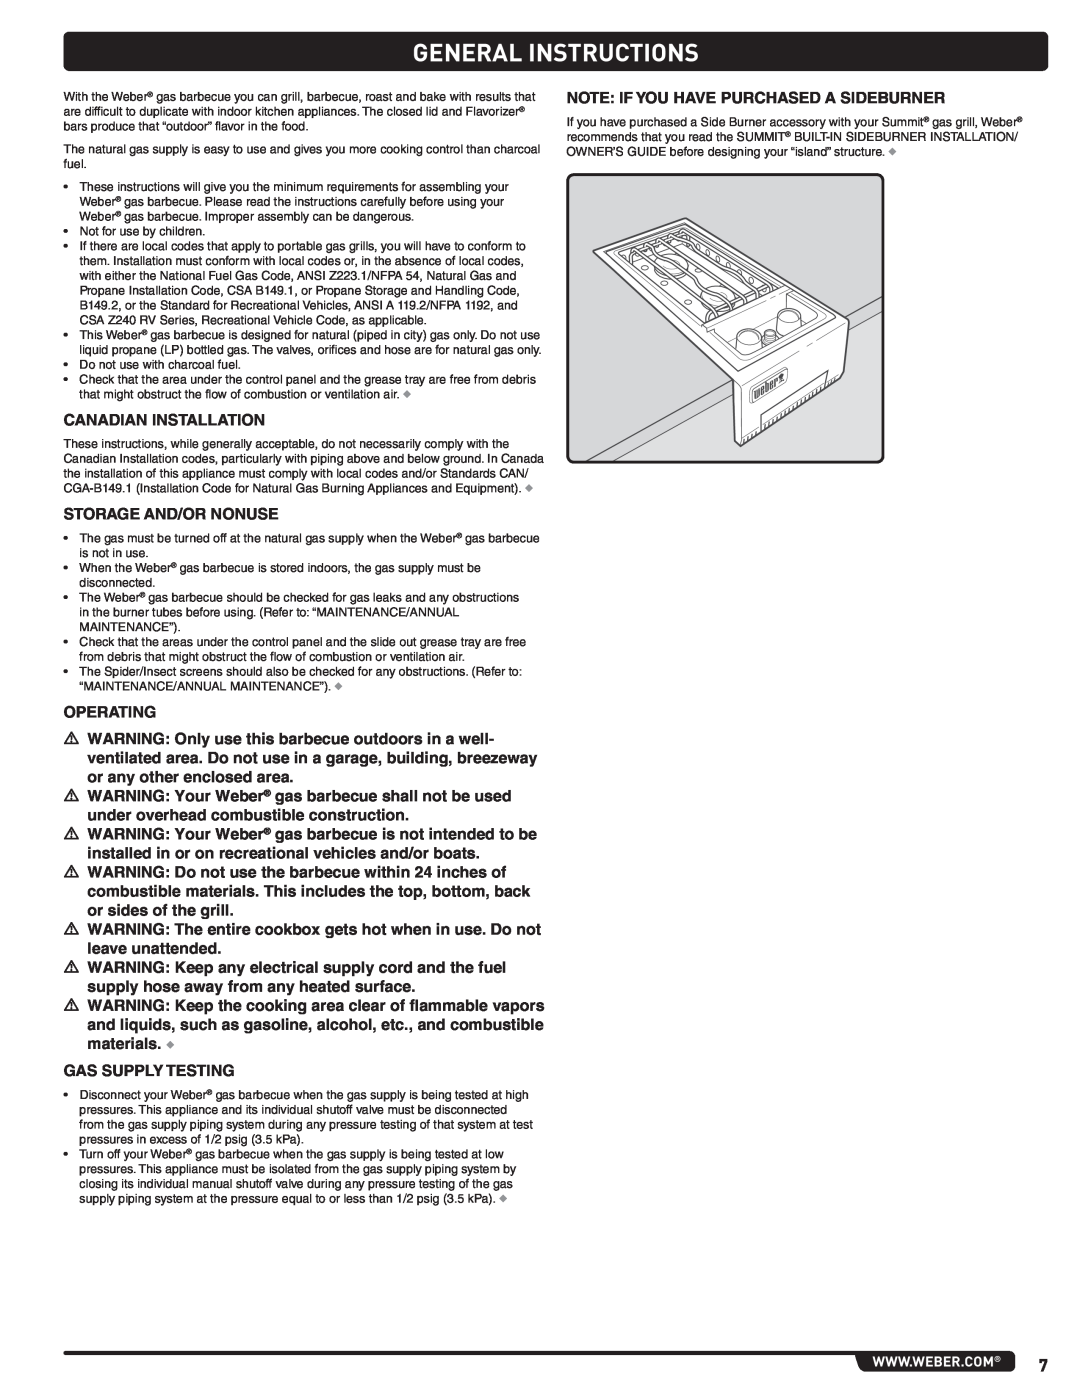 Weber 56576, Summit Gas Grill manual General Instructions 